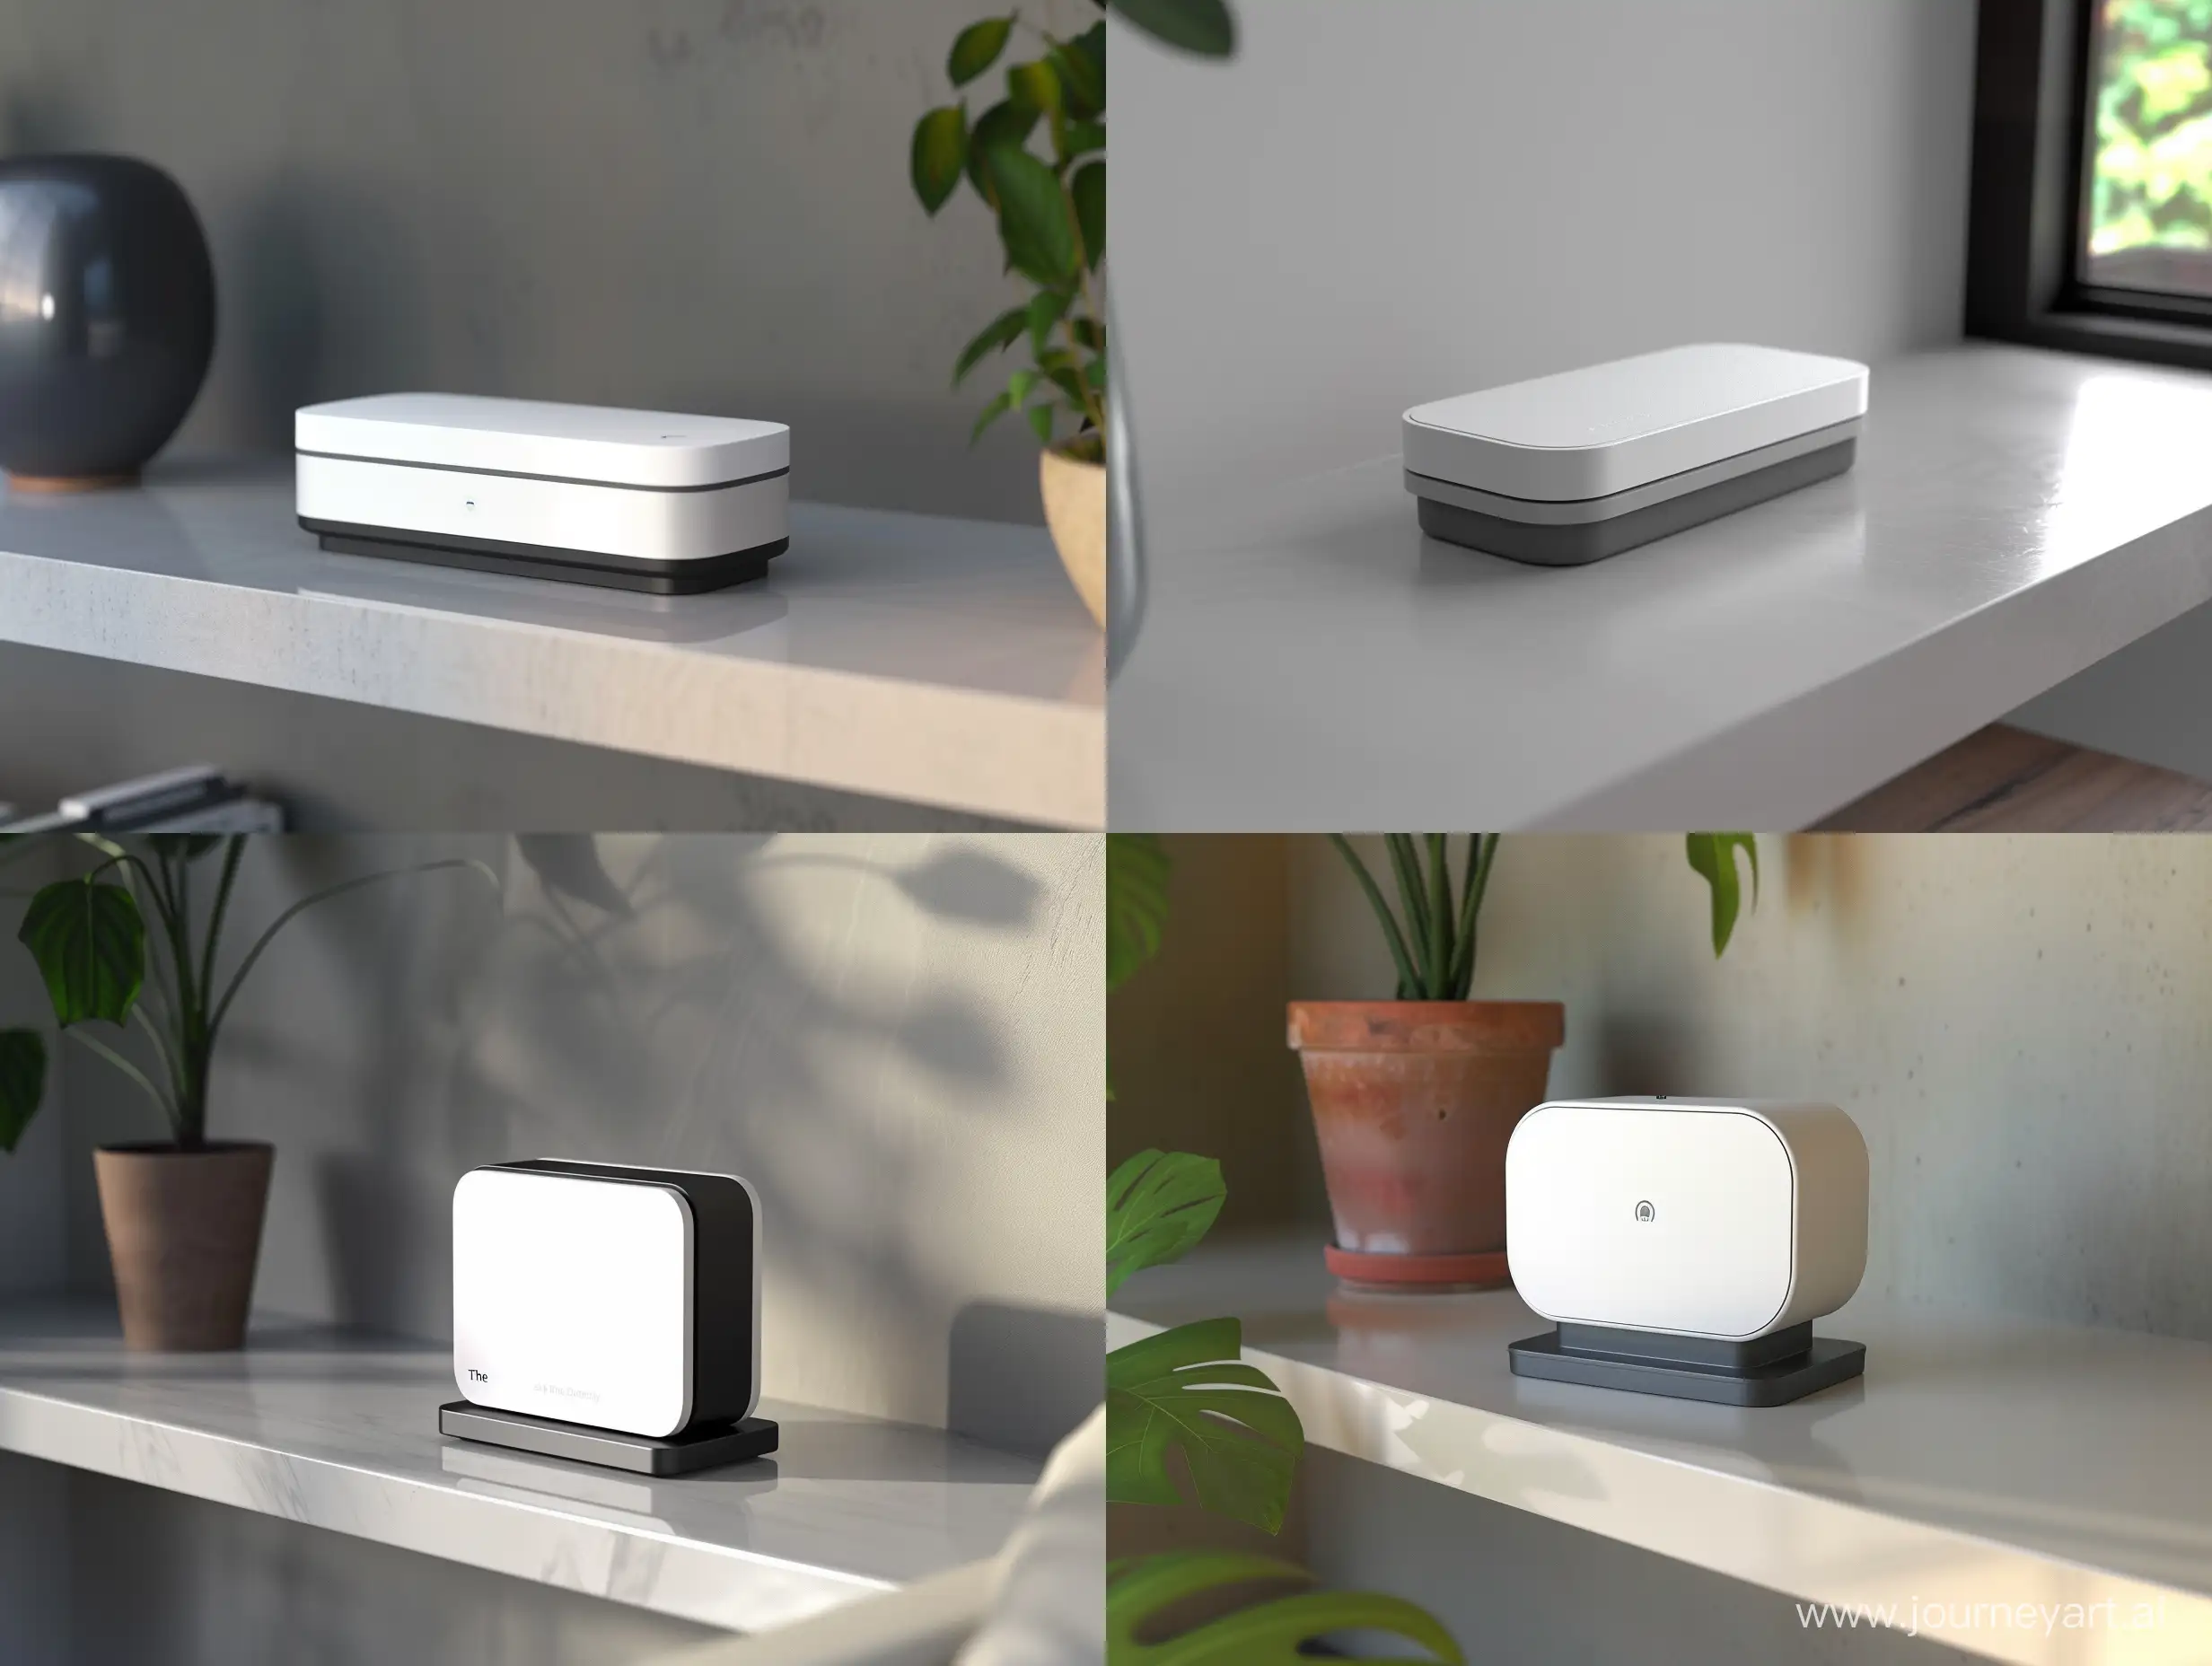 The-Harmony-Hub-Compact-Smart-Home-Connectivity-Device